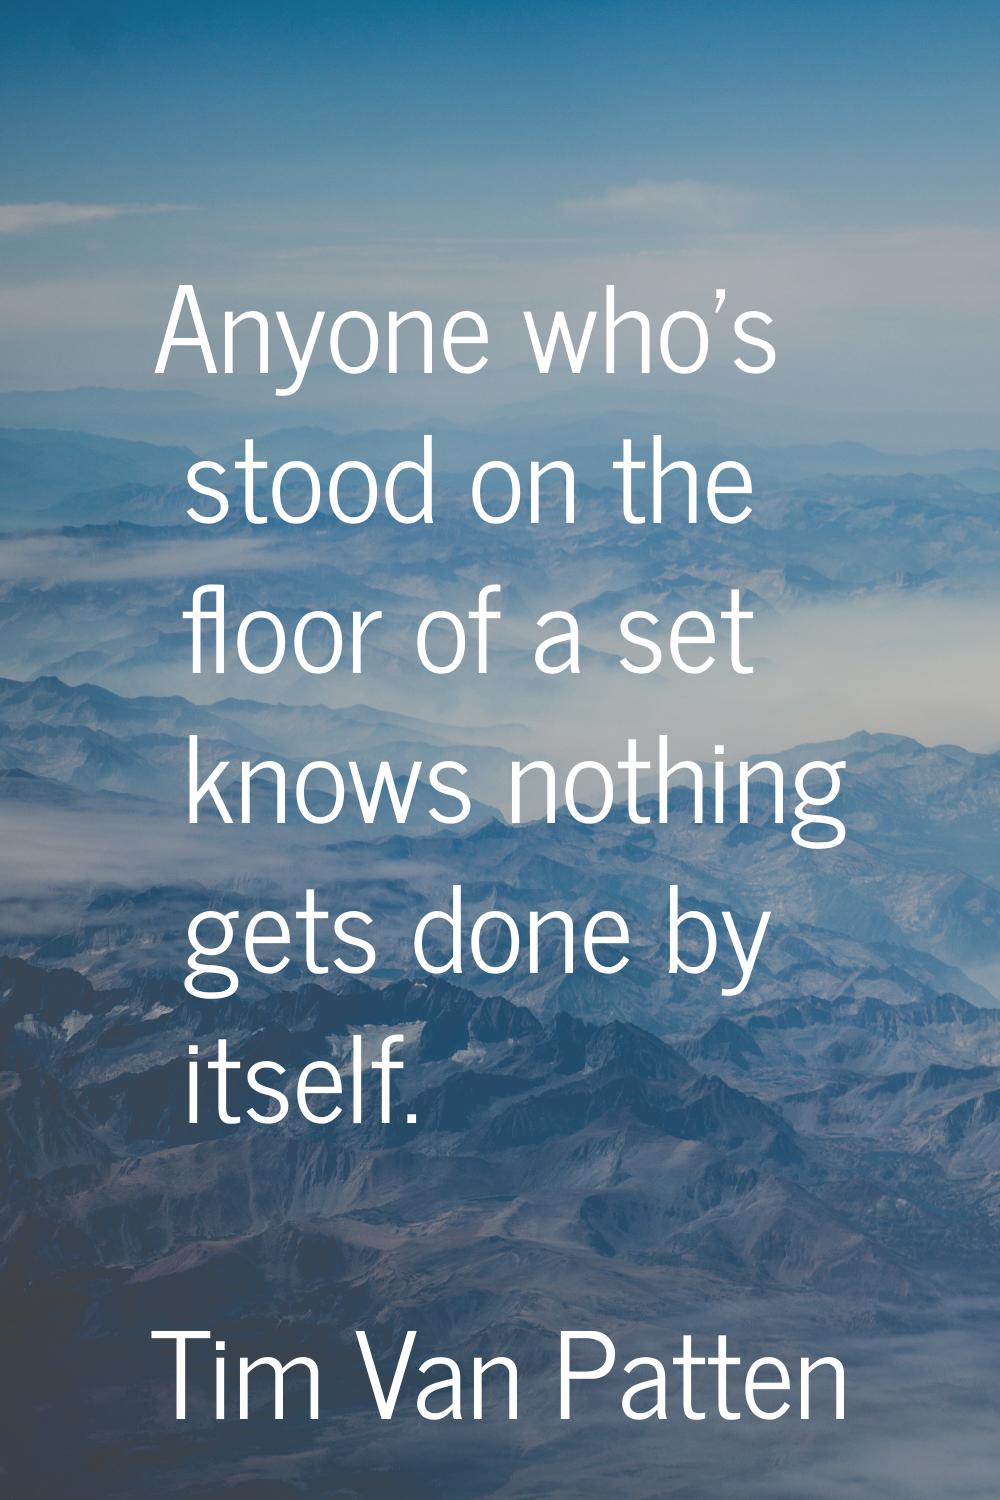 Anyone who's stood on the floor of a set knows nothing gets done by itself.